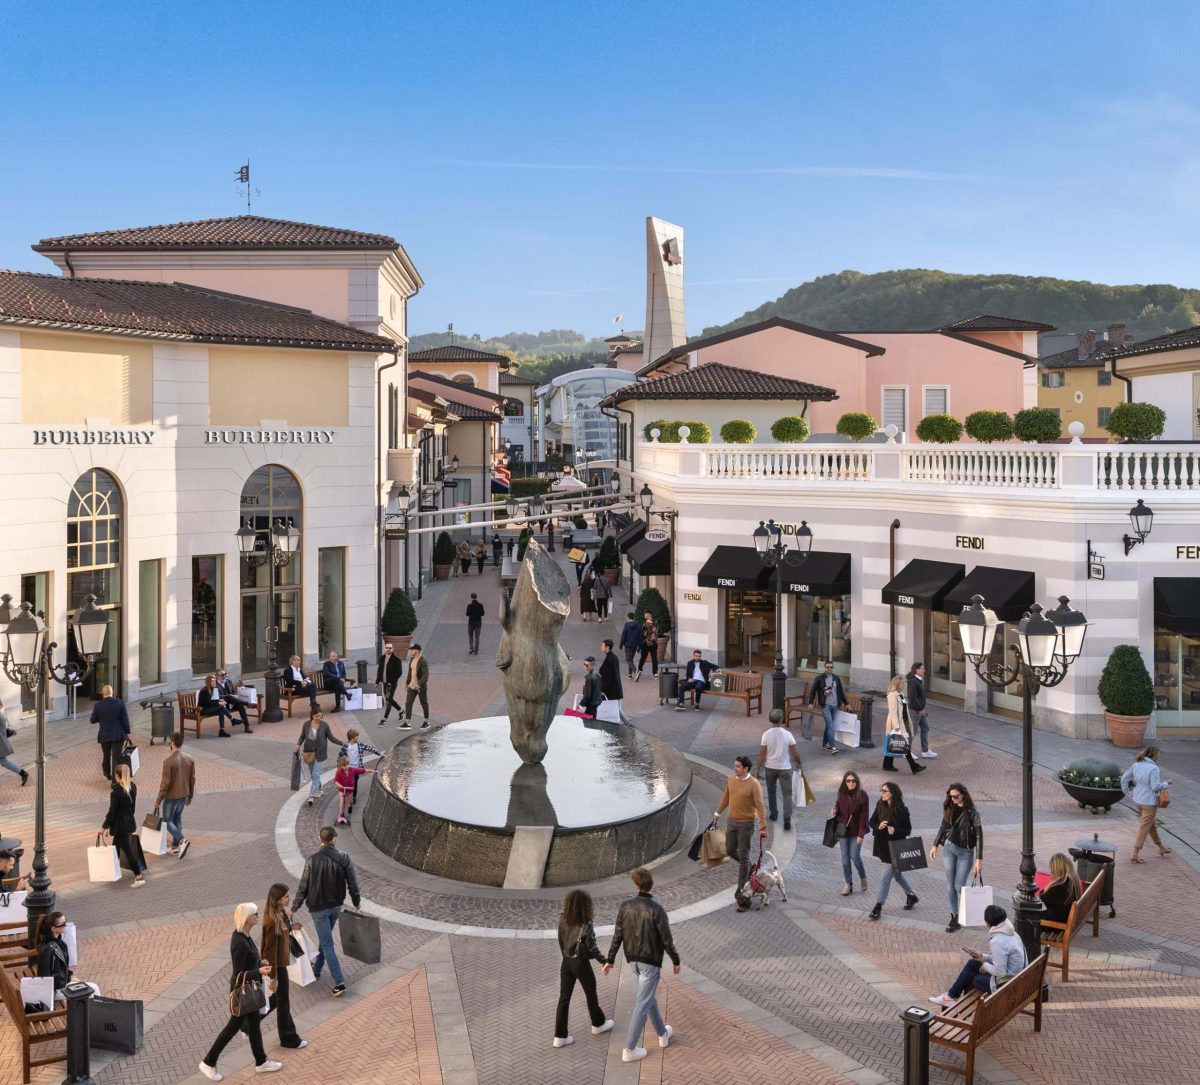 Serravalle Shopping Outlet Bus Tickets from Milan